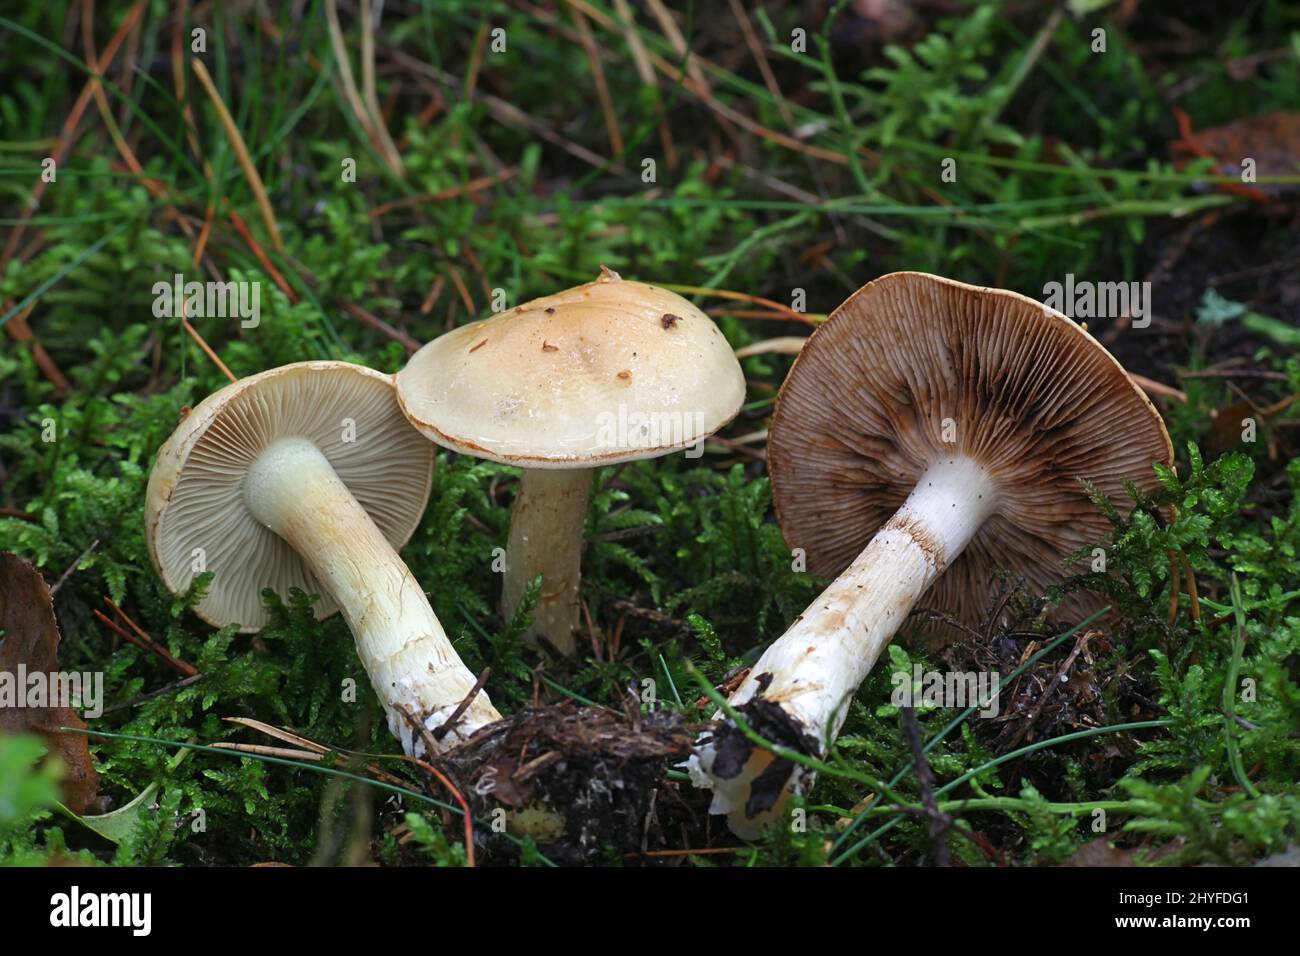 Cortinarius delibutus, known as the bluegill webcap or the yellow webcap, wild mushroom from Finland Stock Photo